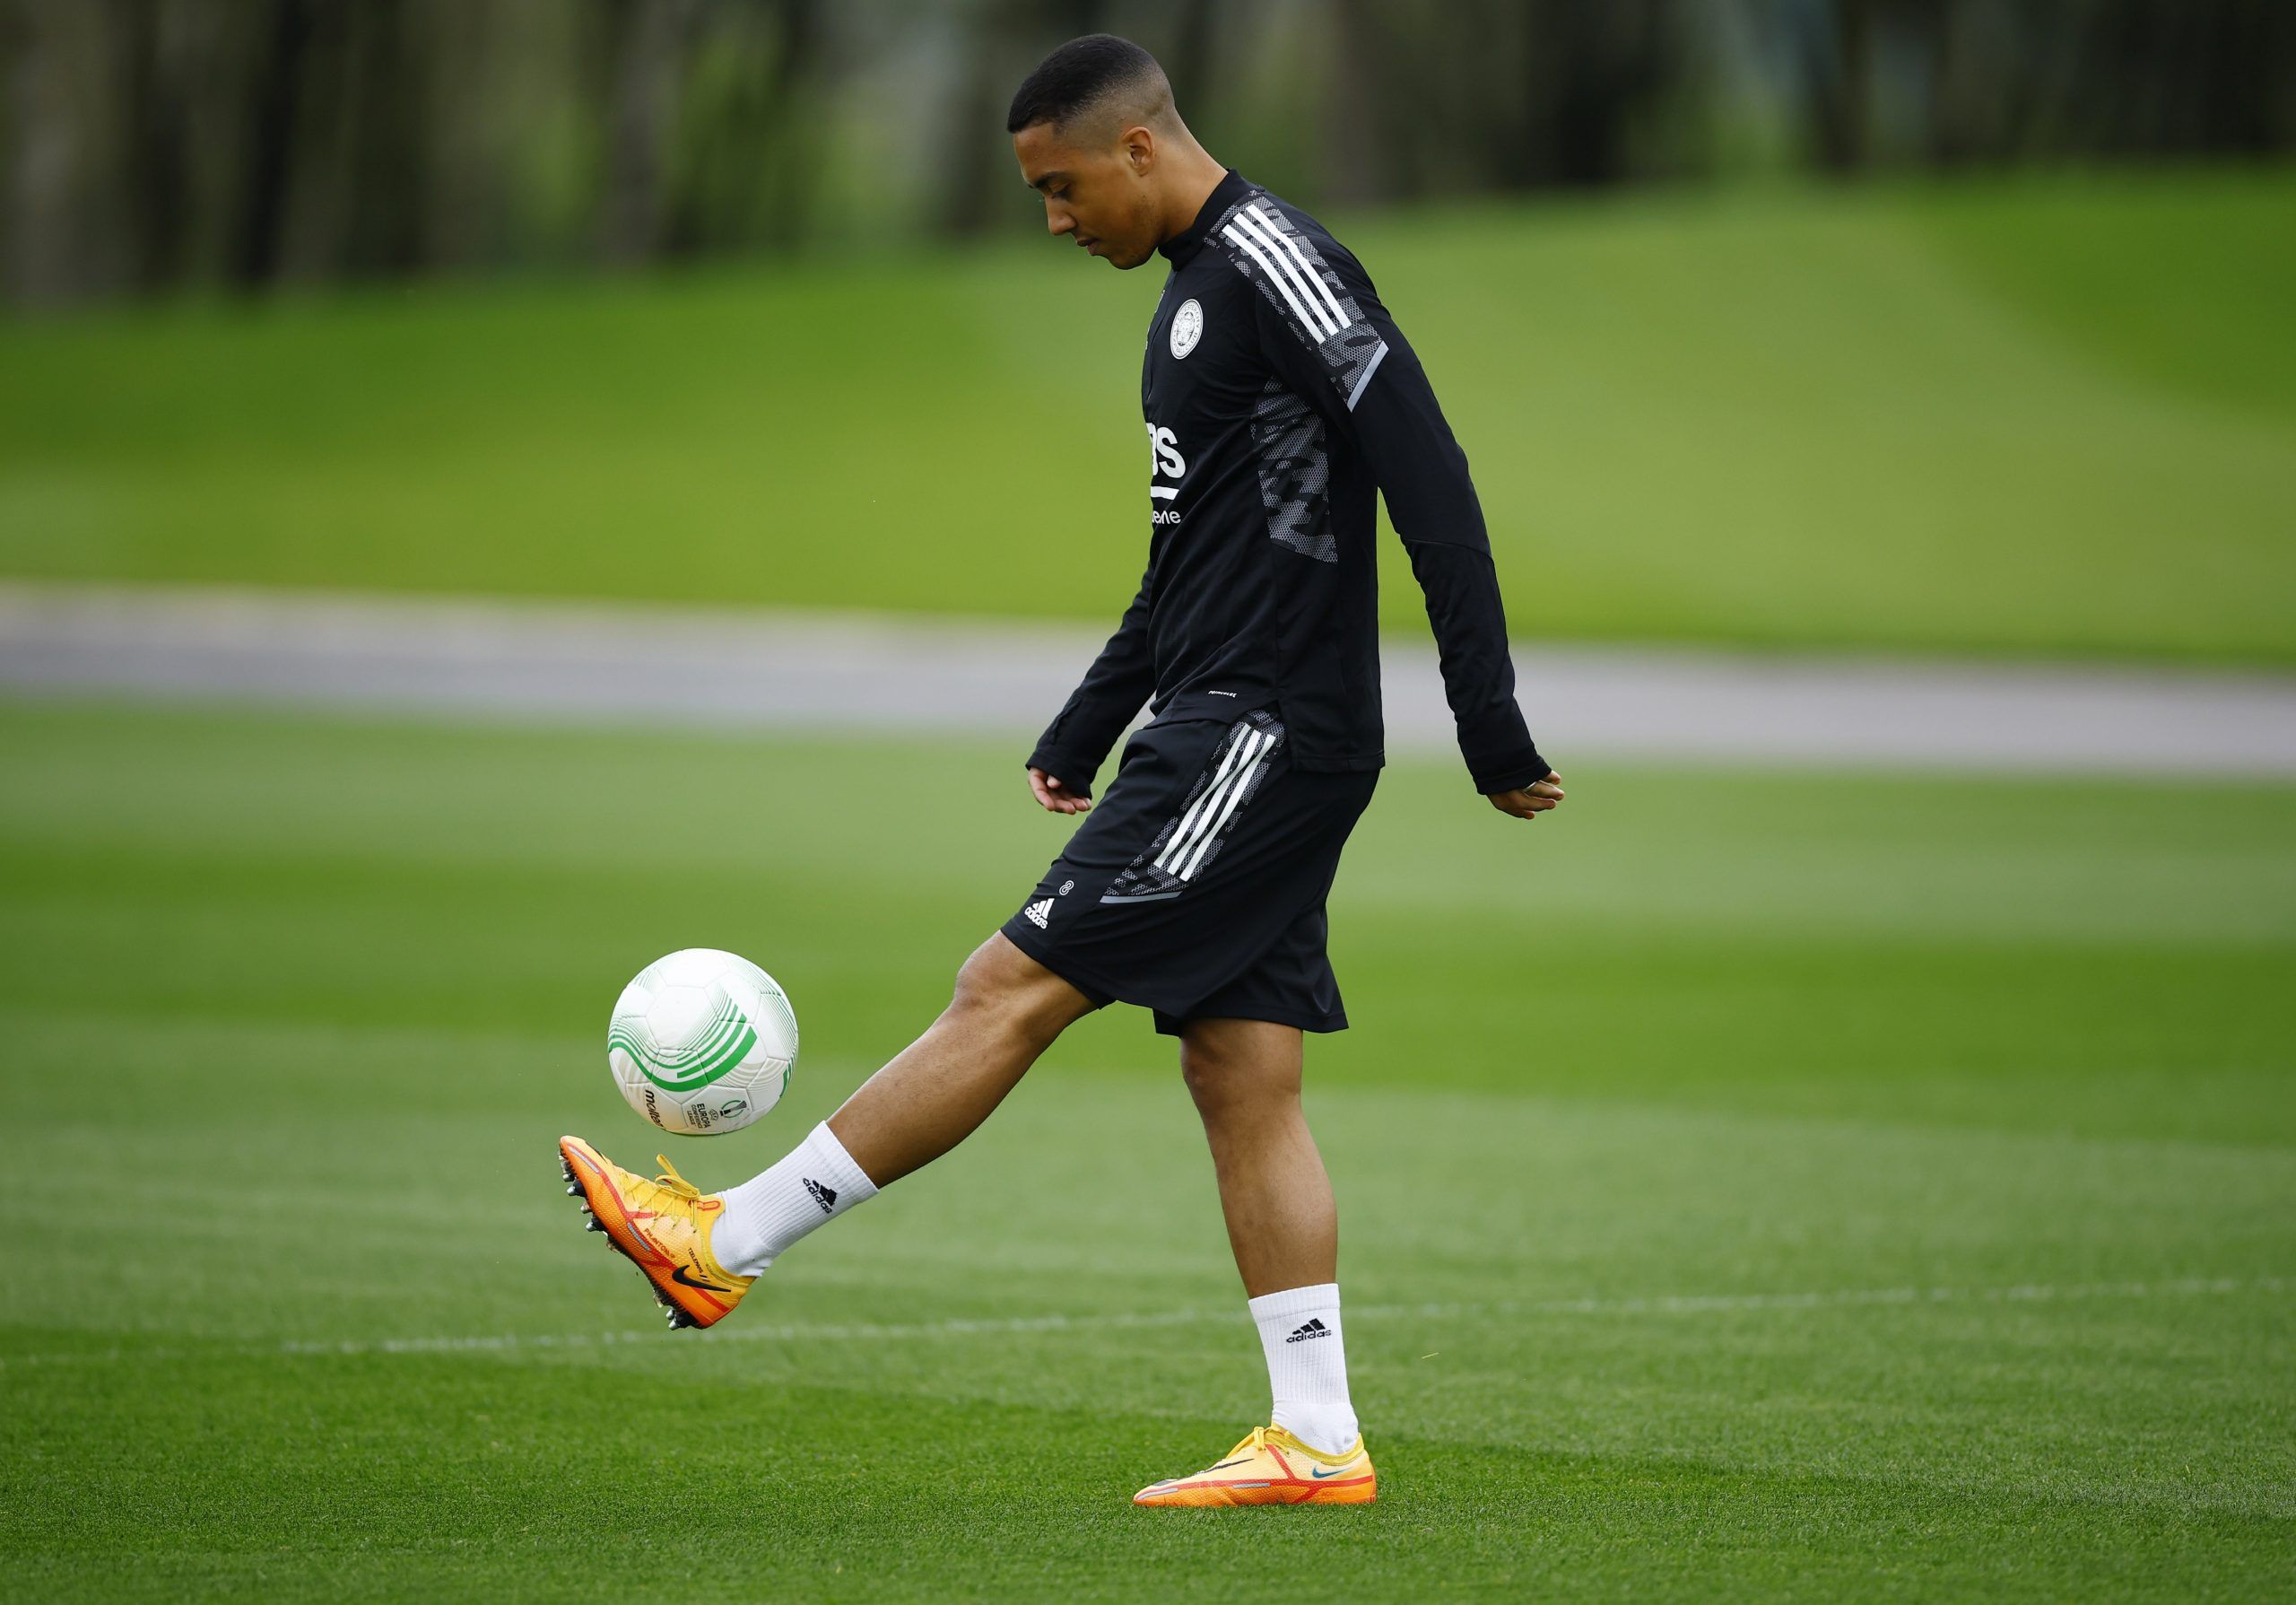 Soccer Football - Europa Conference League - Leicester City Training - Leicester City Training Ground, Seagrave, Britain - May 4, 2022 Leicester City's Youri Tielemans during training Action Images via Reuters/Andrew Boyers